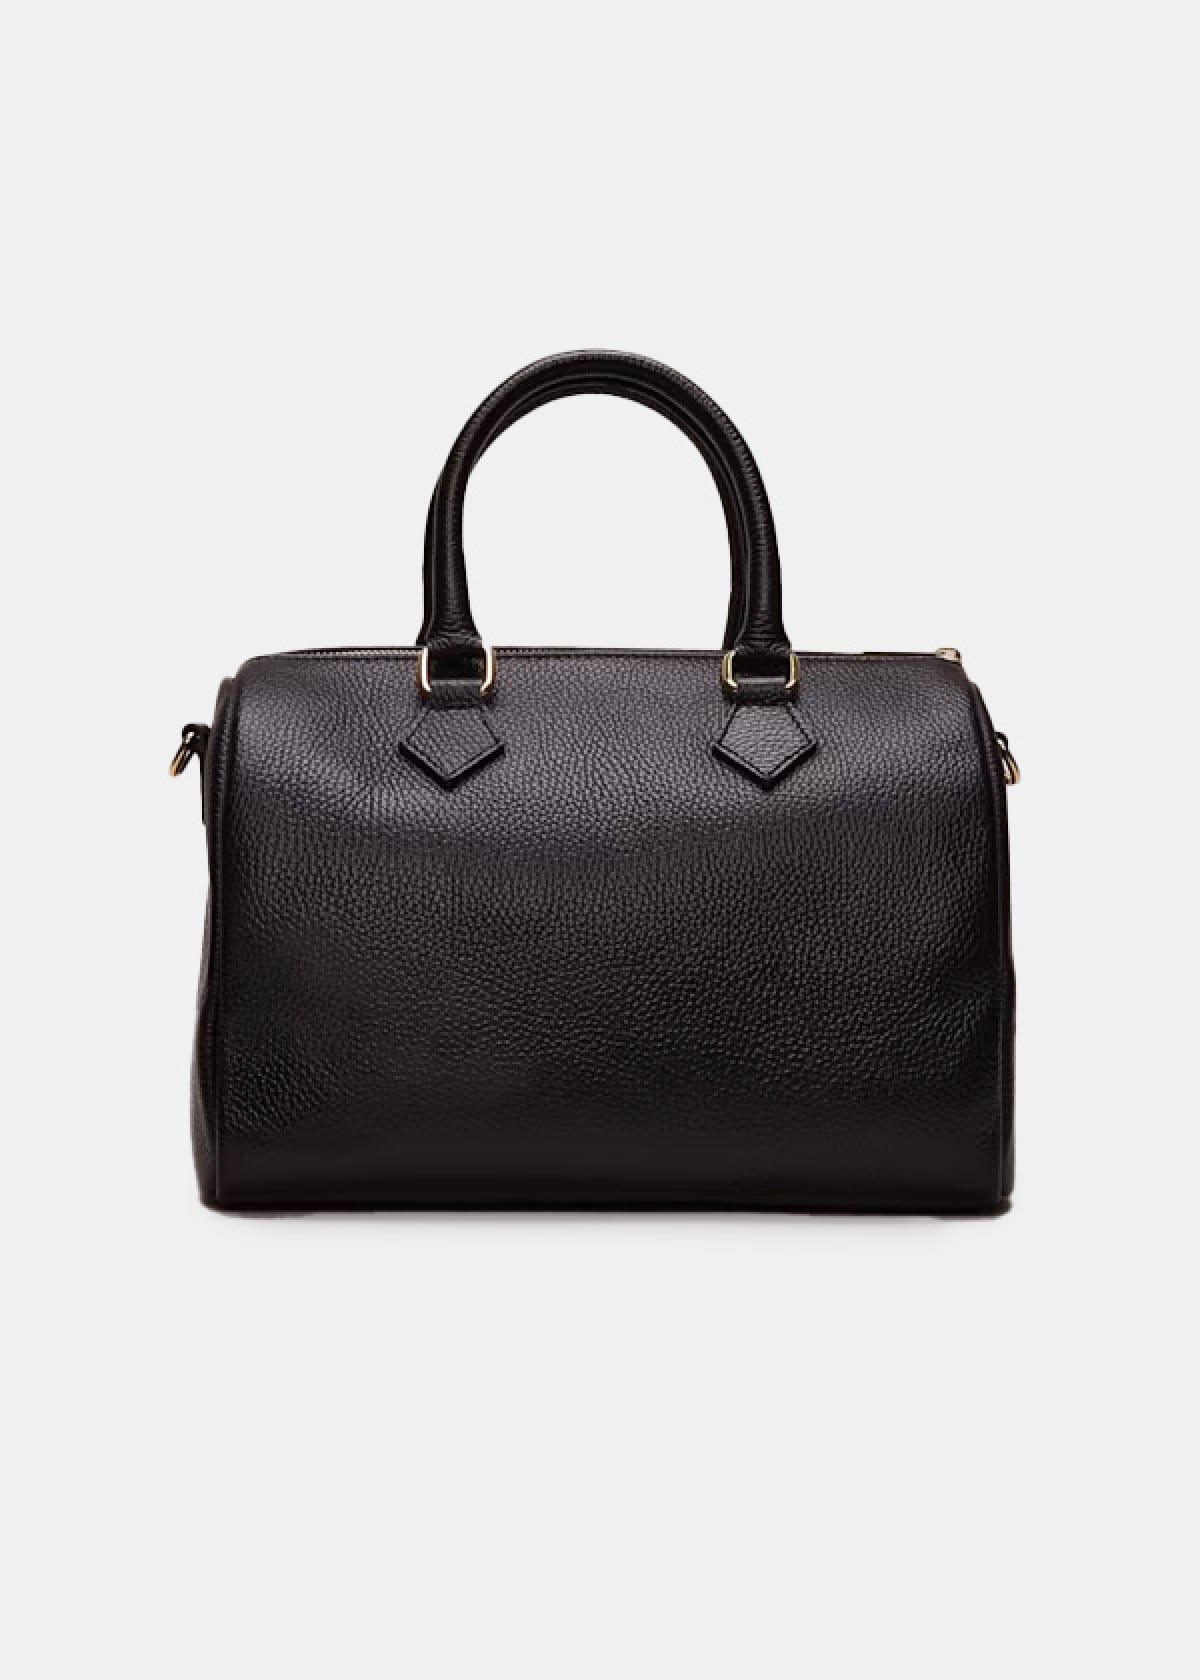 Phase Eight Black Leather Bowling Bag